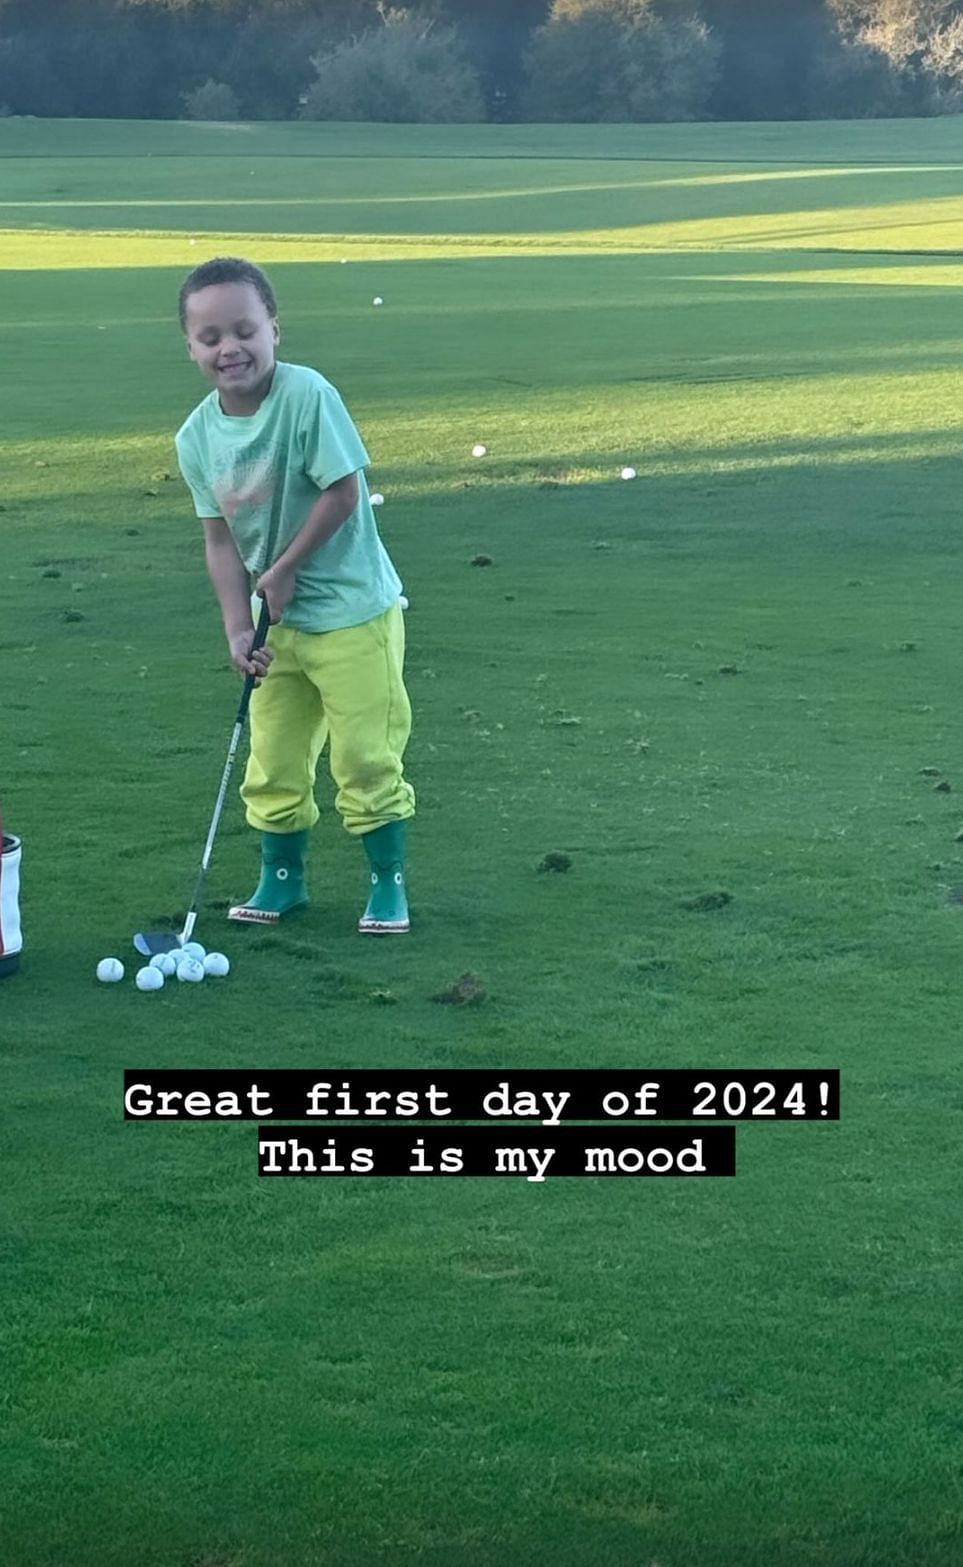 Ayesha Curry shows a picture of her son, Canon, enjoying golf